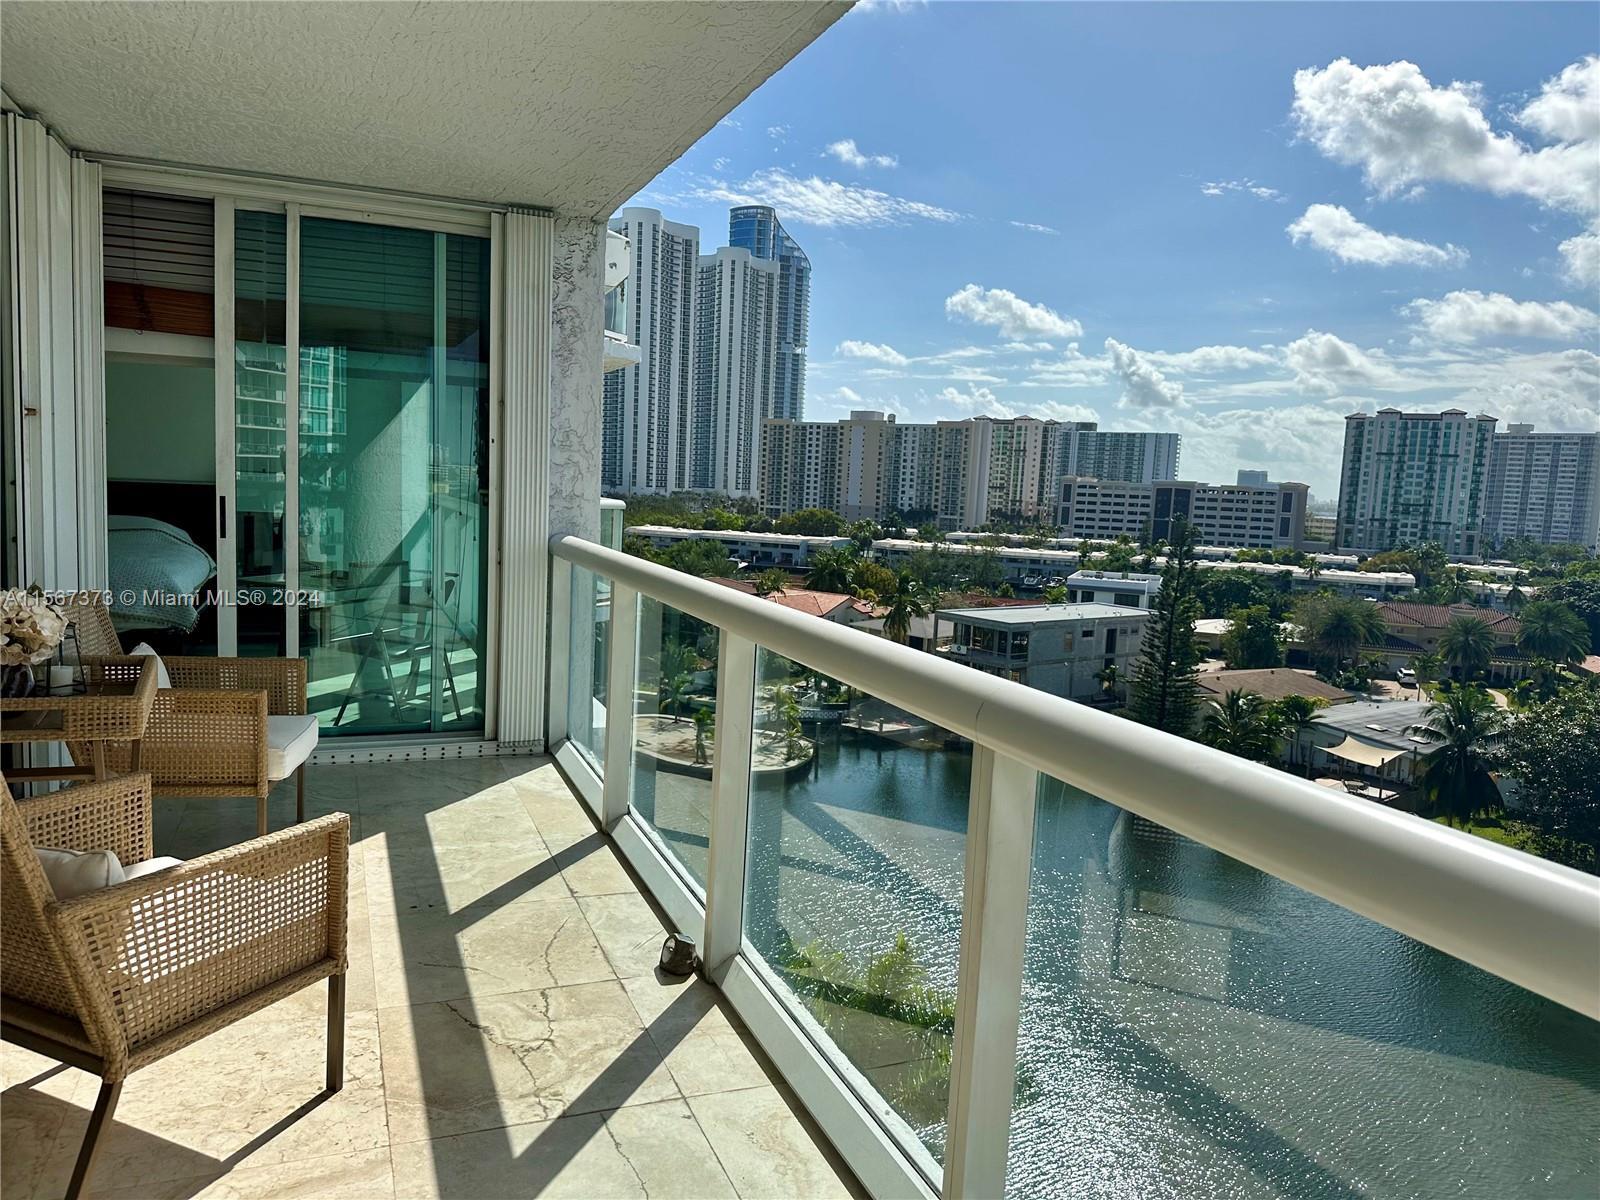 Photo of 16500 S Collins Ave #755 in Sunny Isles Beach, FL